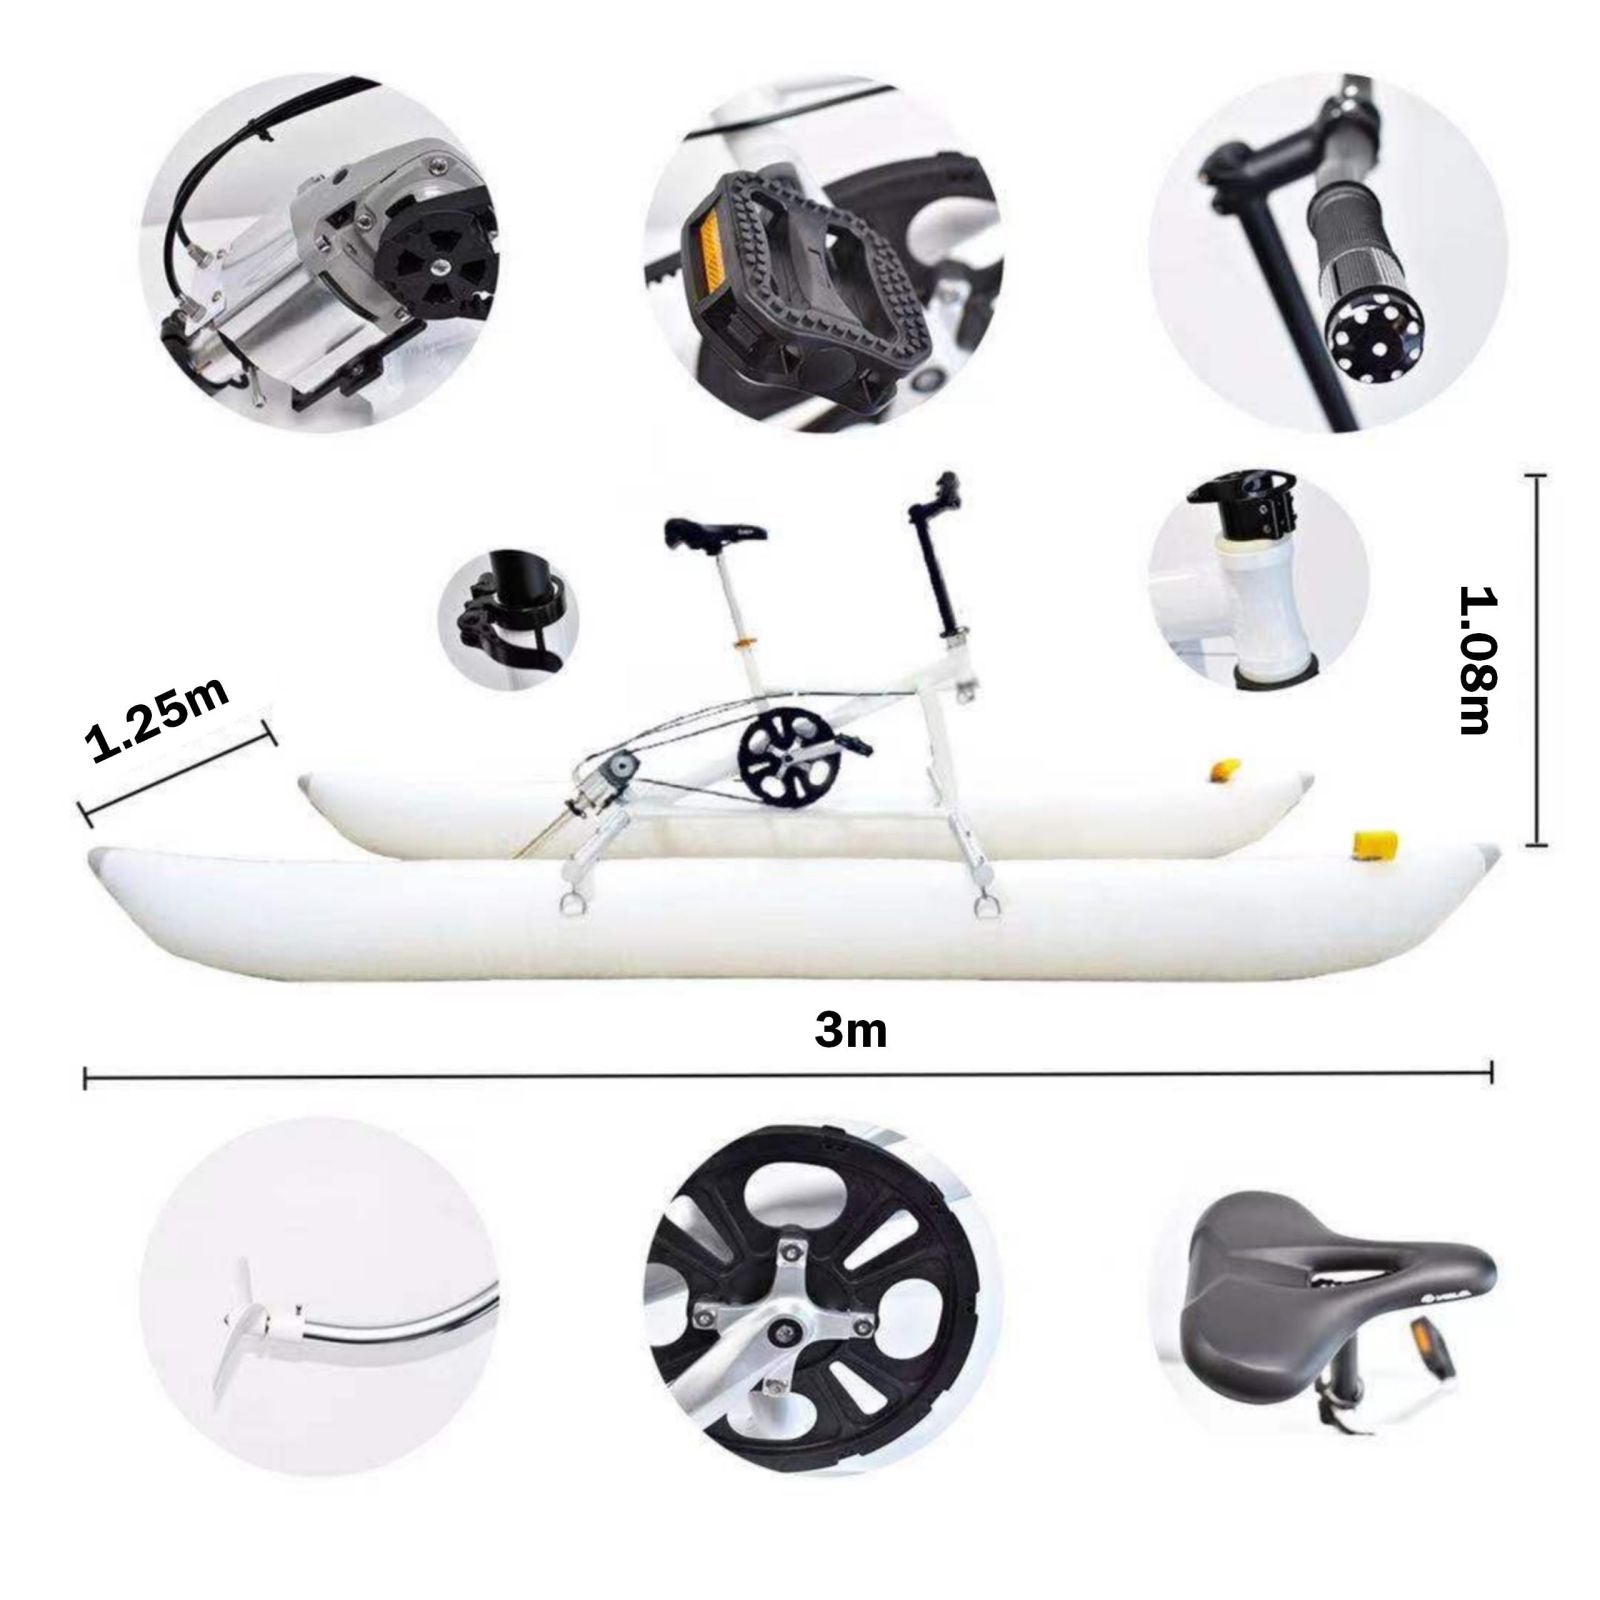 Inflatable Water Bike For Water Sport Portable Yacht Kayak Boatbike - SILBERSHELL